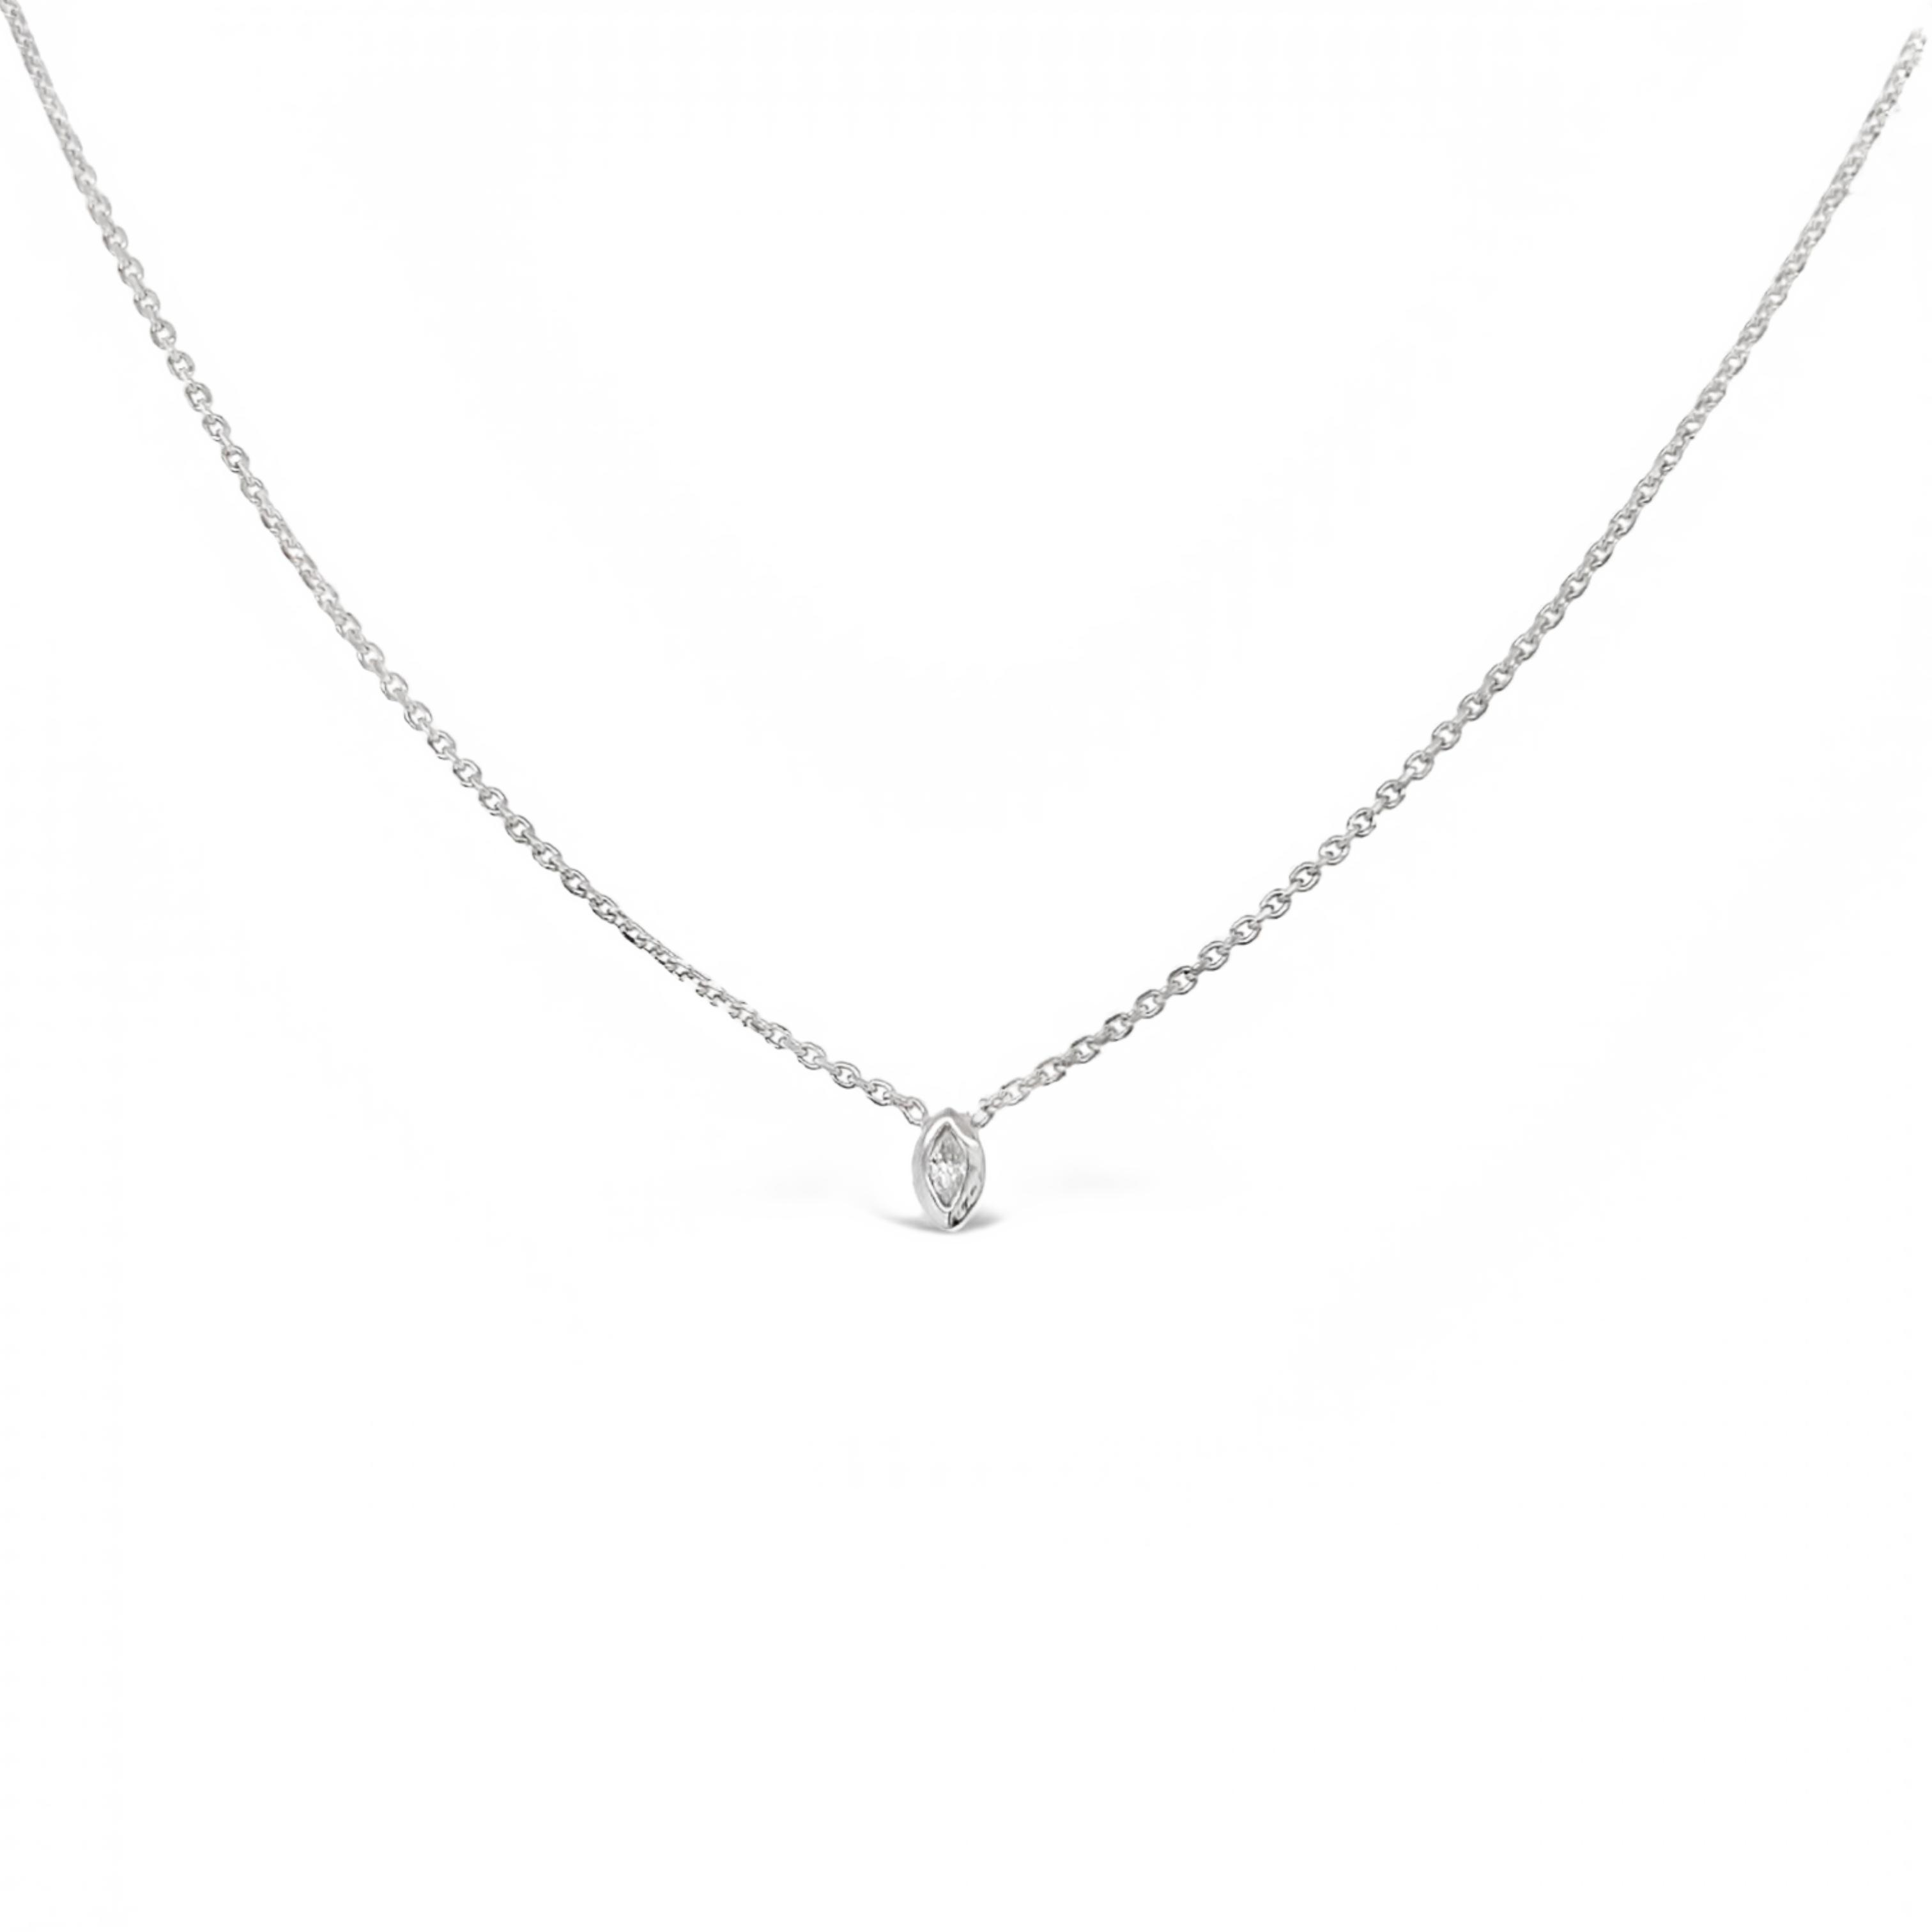 14 karat white gold solitaire necklace with one 0.03ct bezel set marquise Diamond